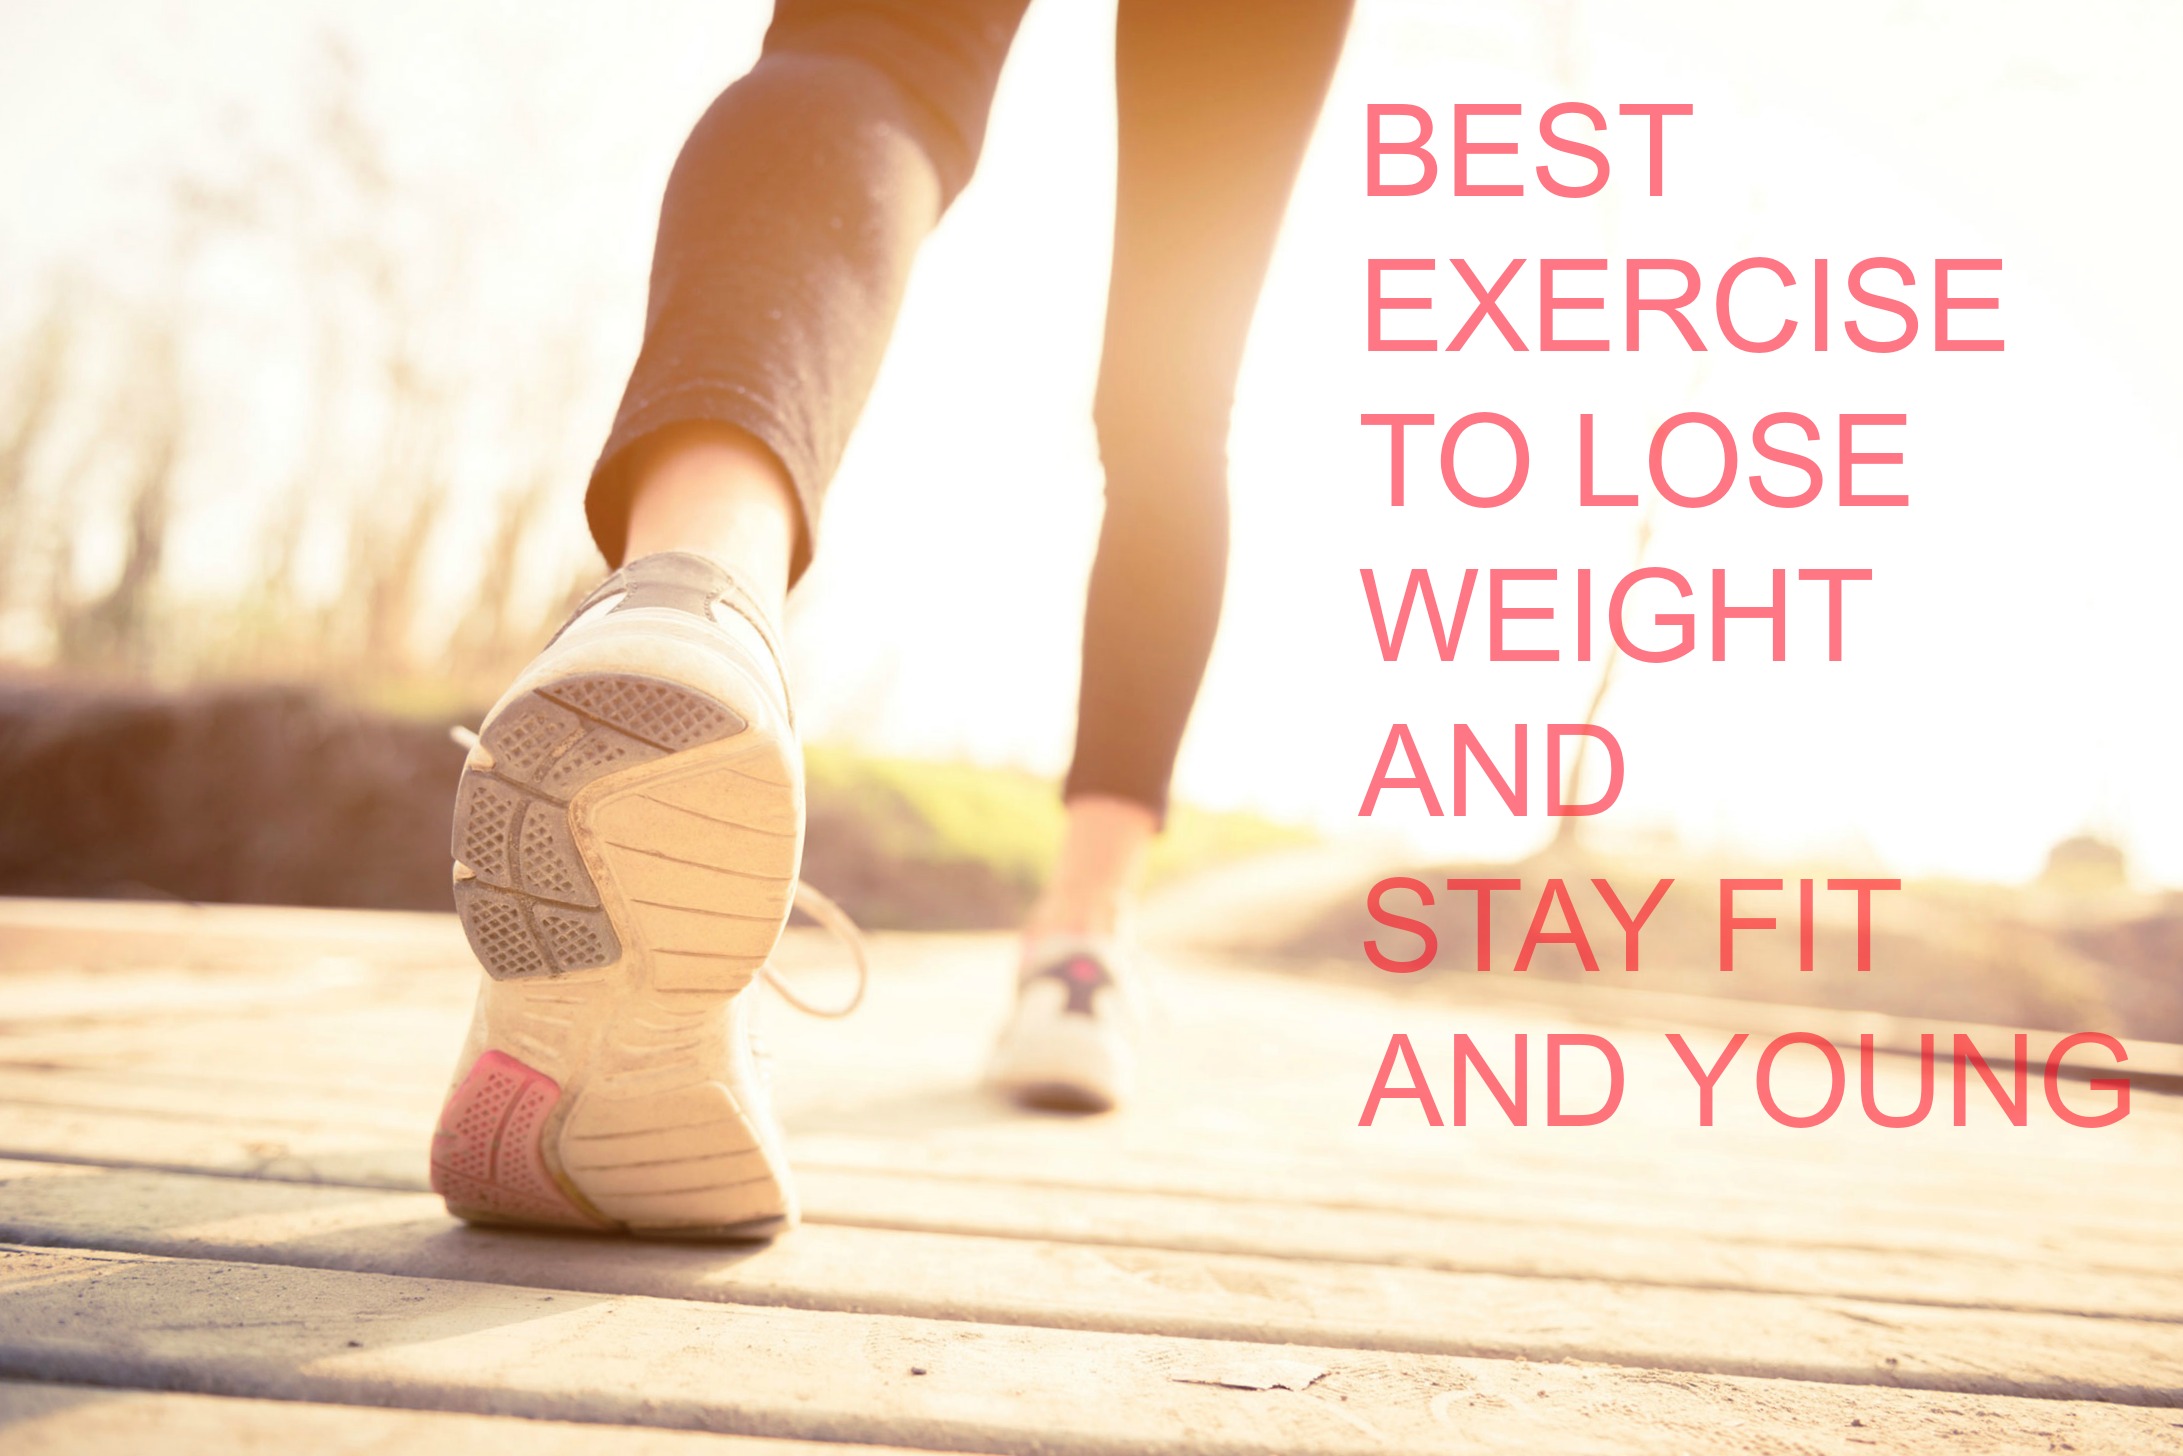 BEST EXERCISE TO LOSE WEIGHT AND STAY FIT AND YOUNG